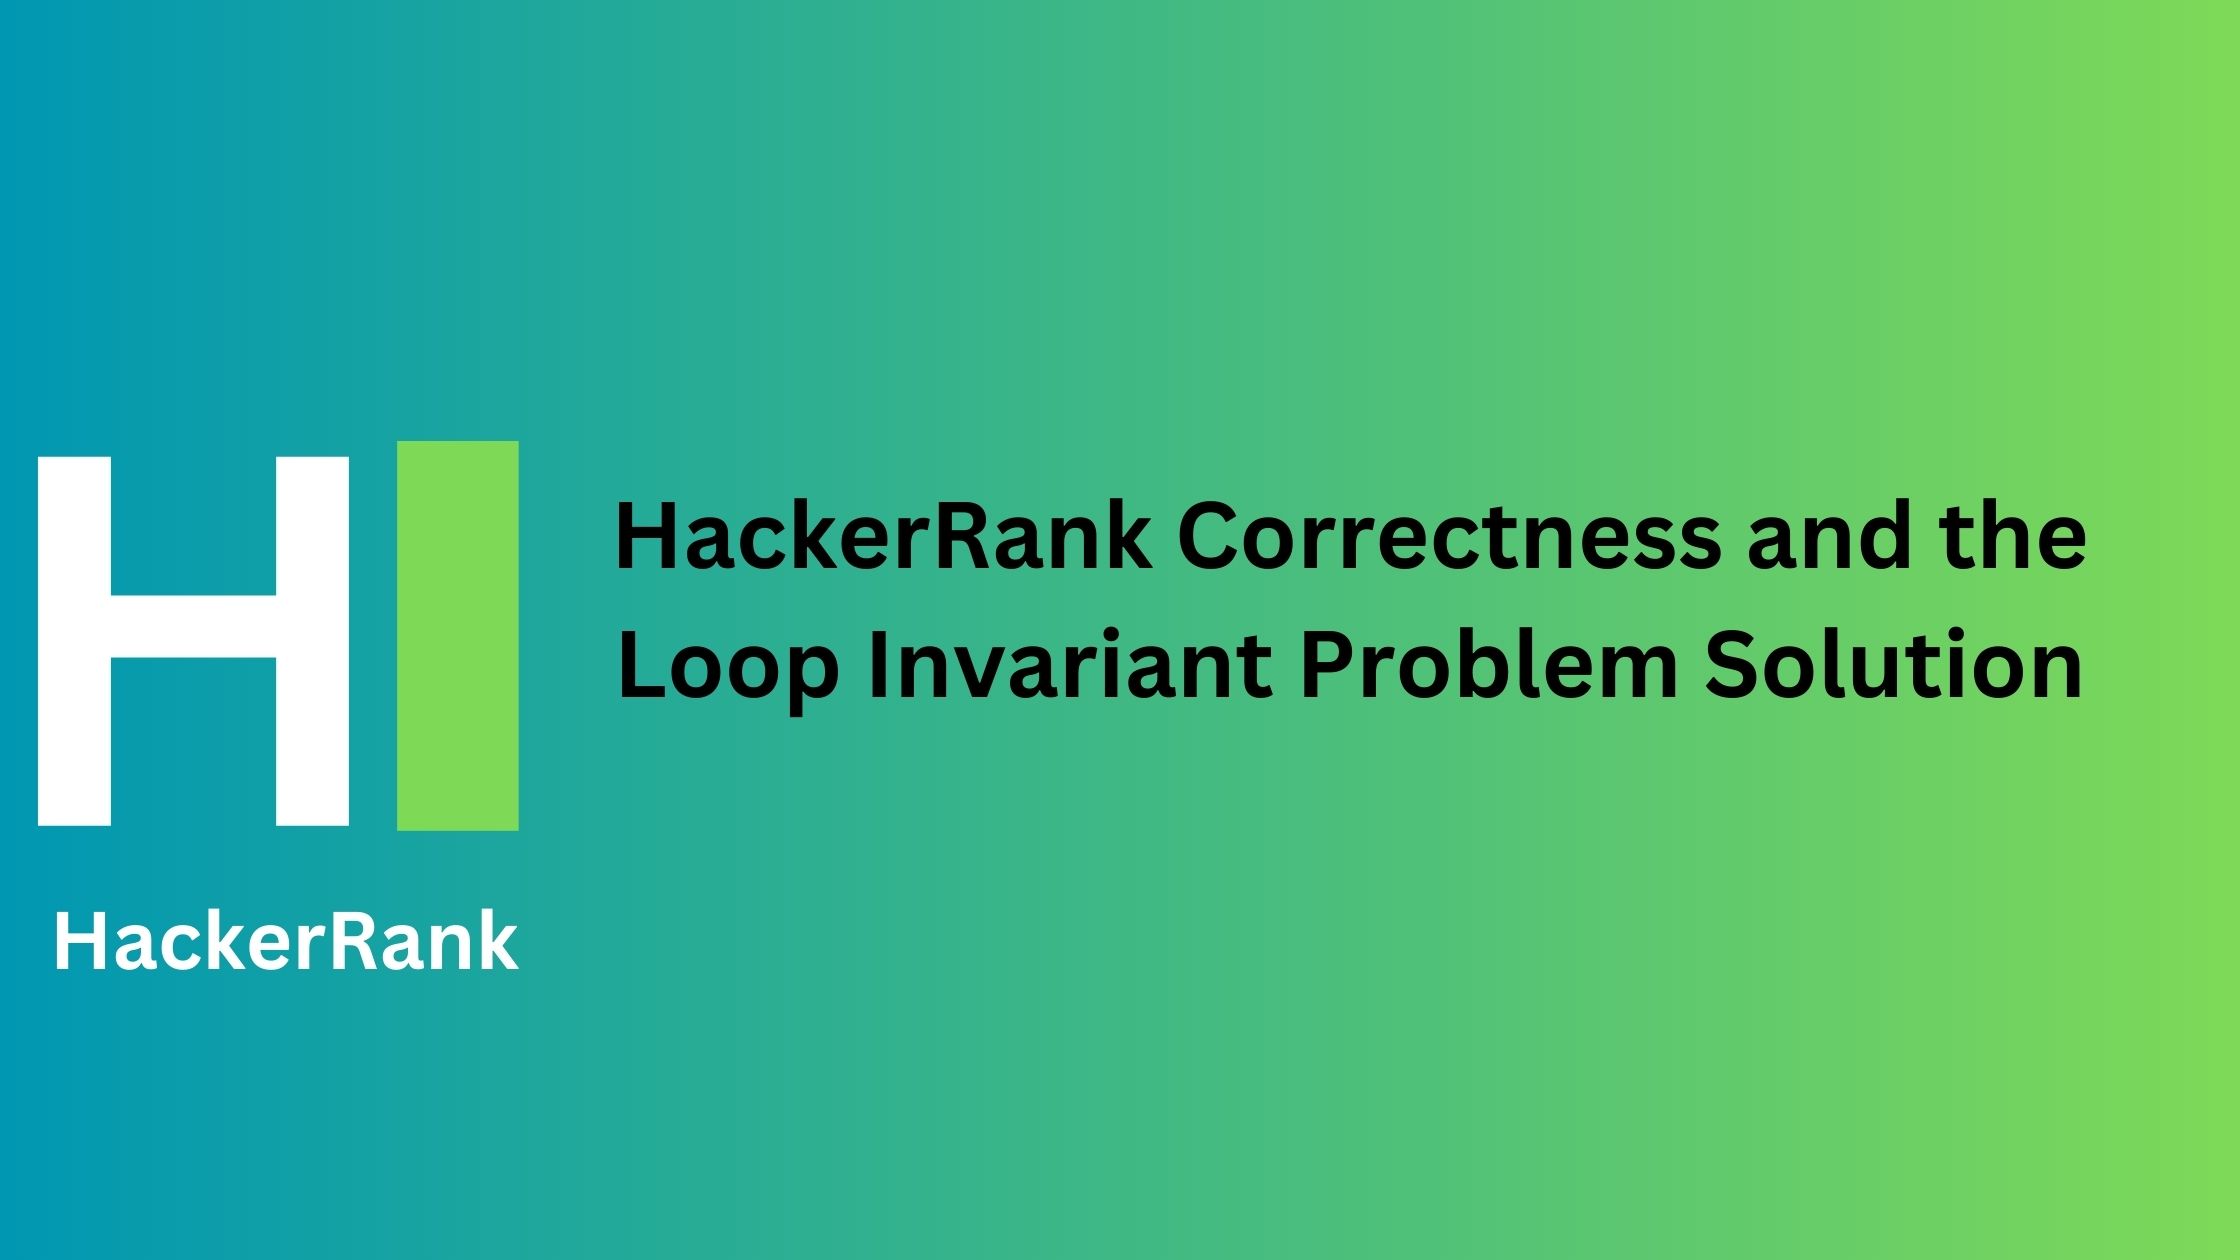 HackerRank Correctness and the Loop Invariant Problem Solution